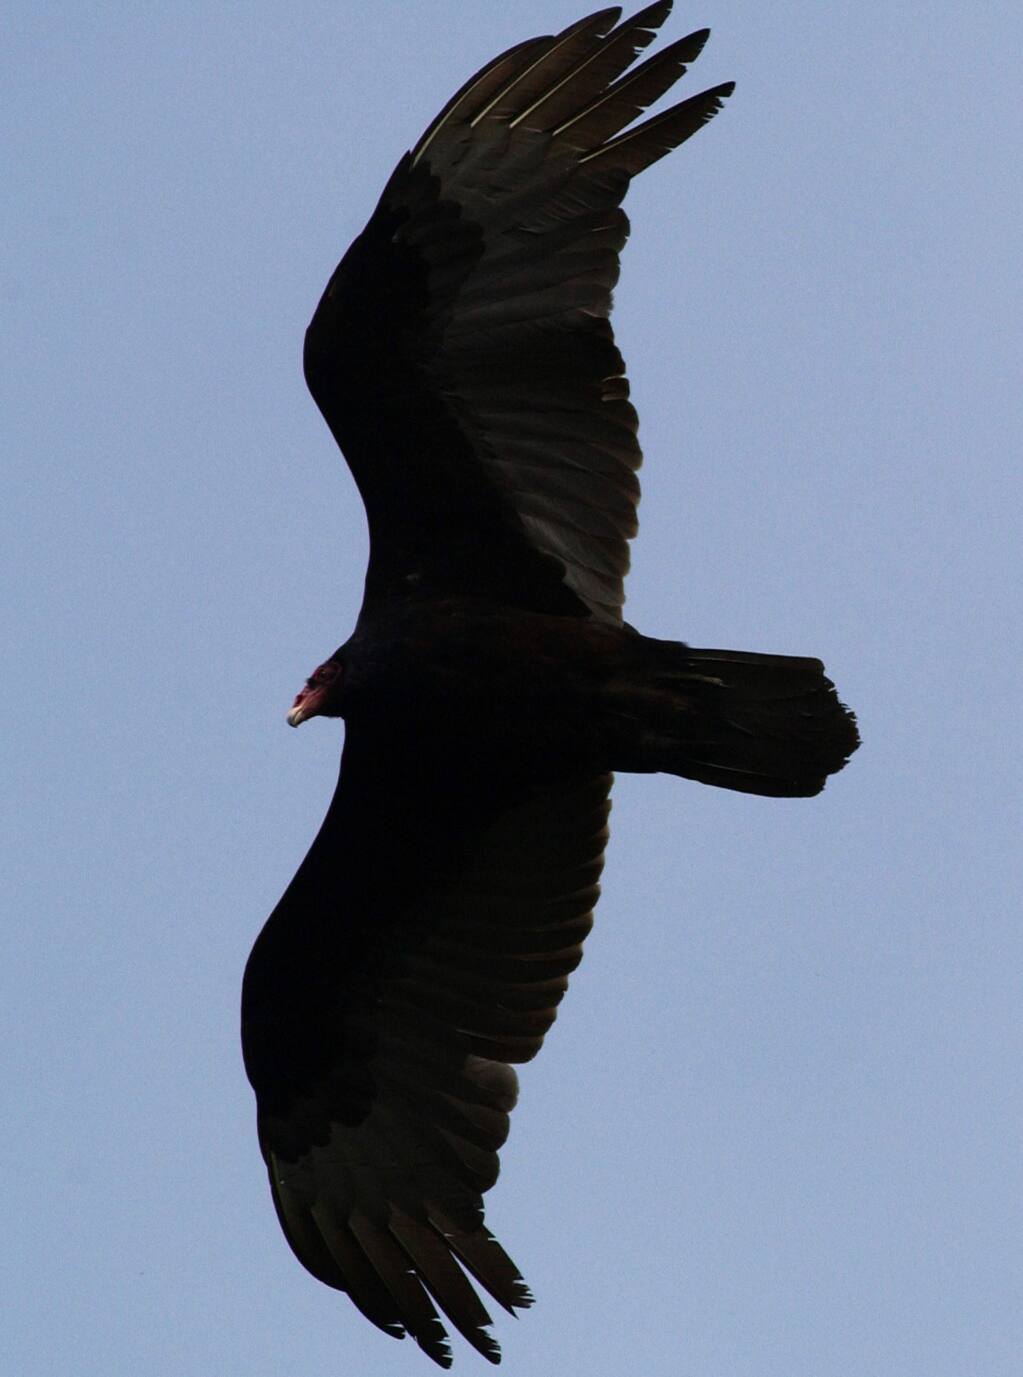 The natural world: Turkey vultures